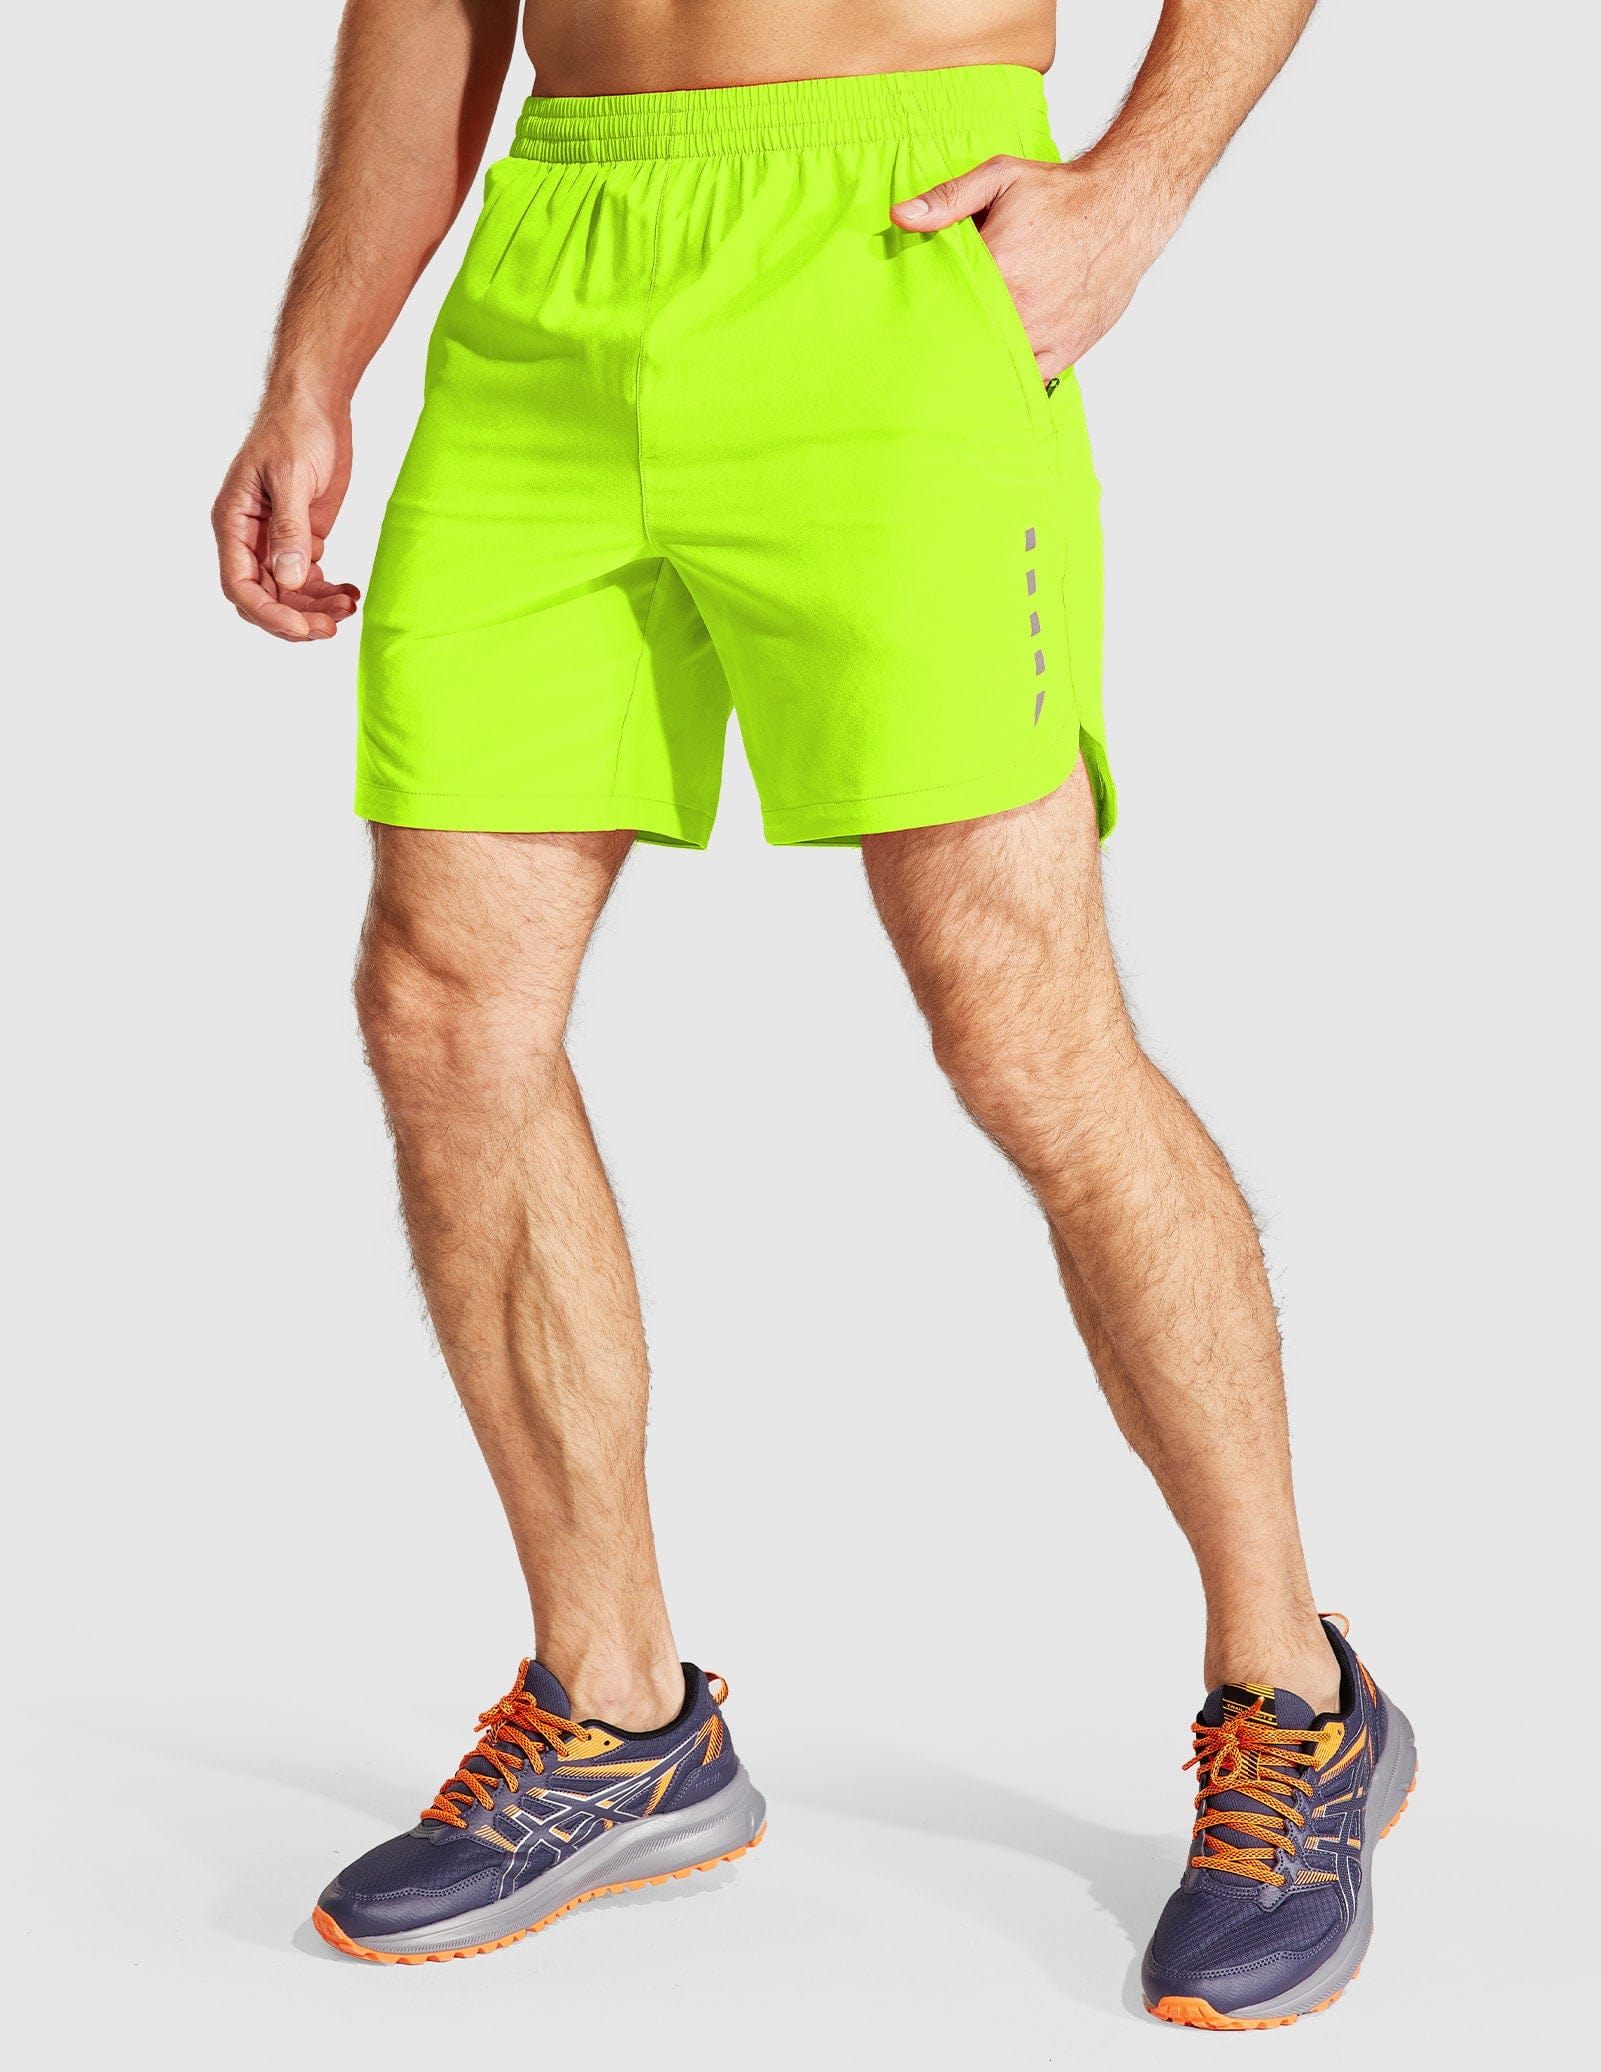 Men's 7 Inch Running Shorts Quick Dry with Zipper Pockets Men's Shorts Neon Green / S MIER